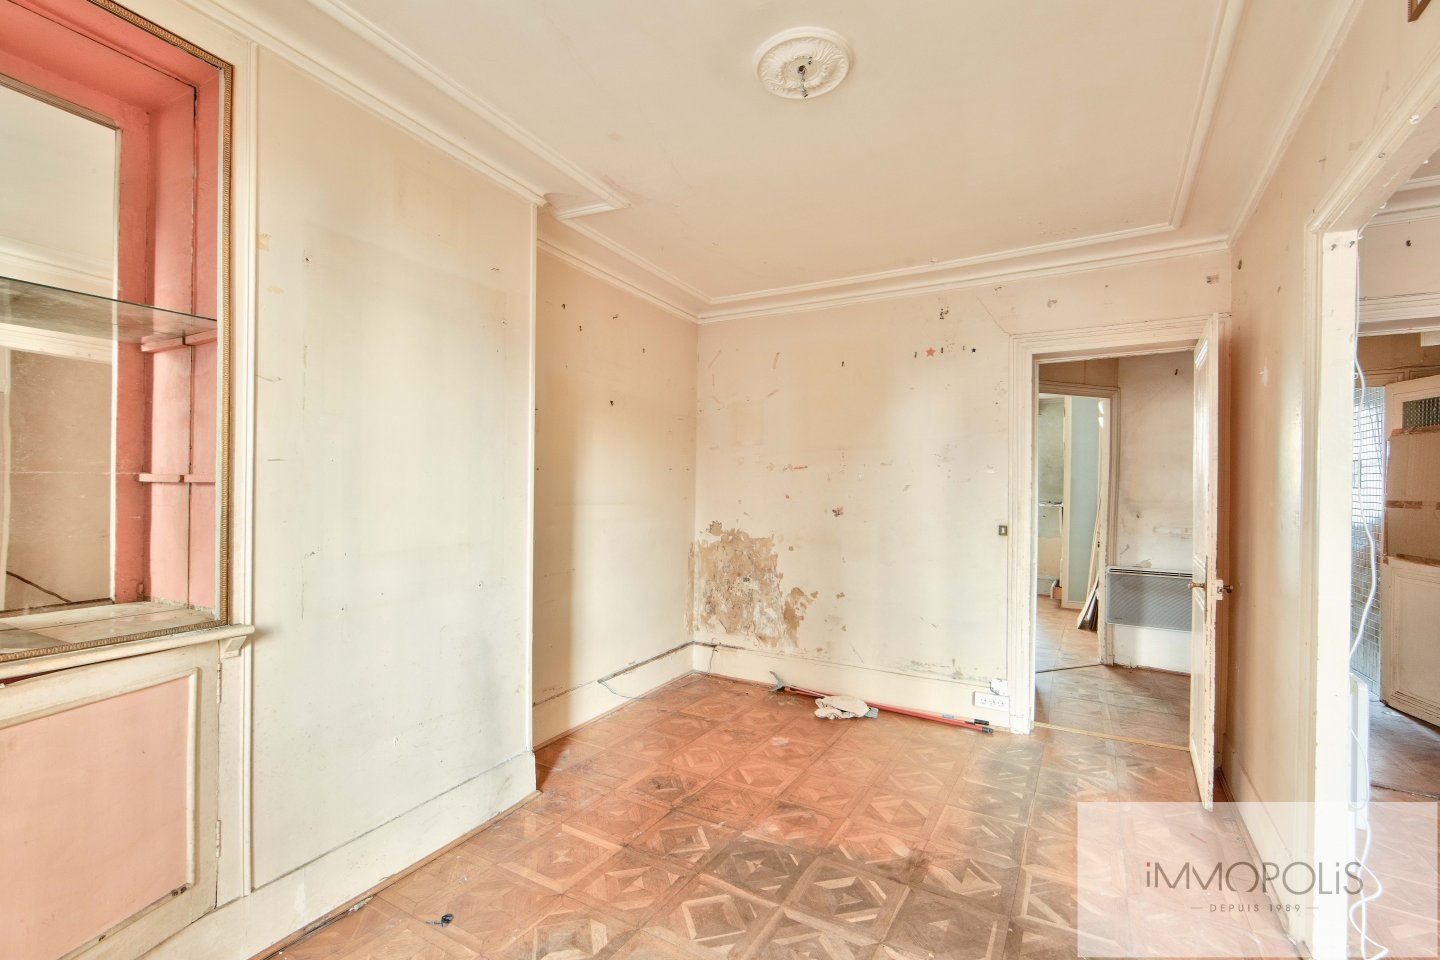 Apartment to be renovated in the heart of the abbesses. 3